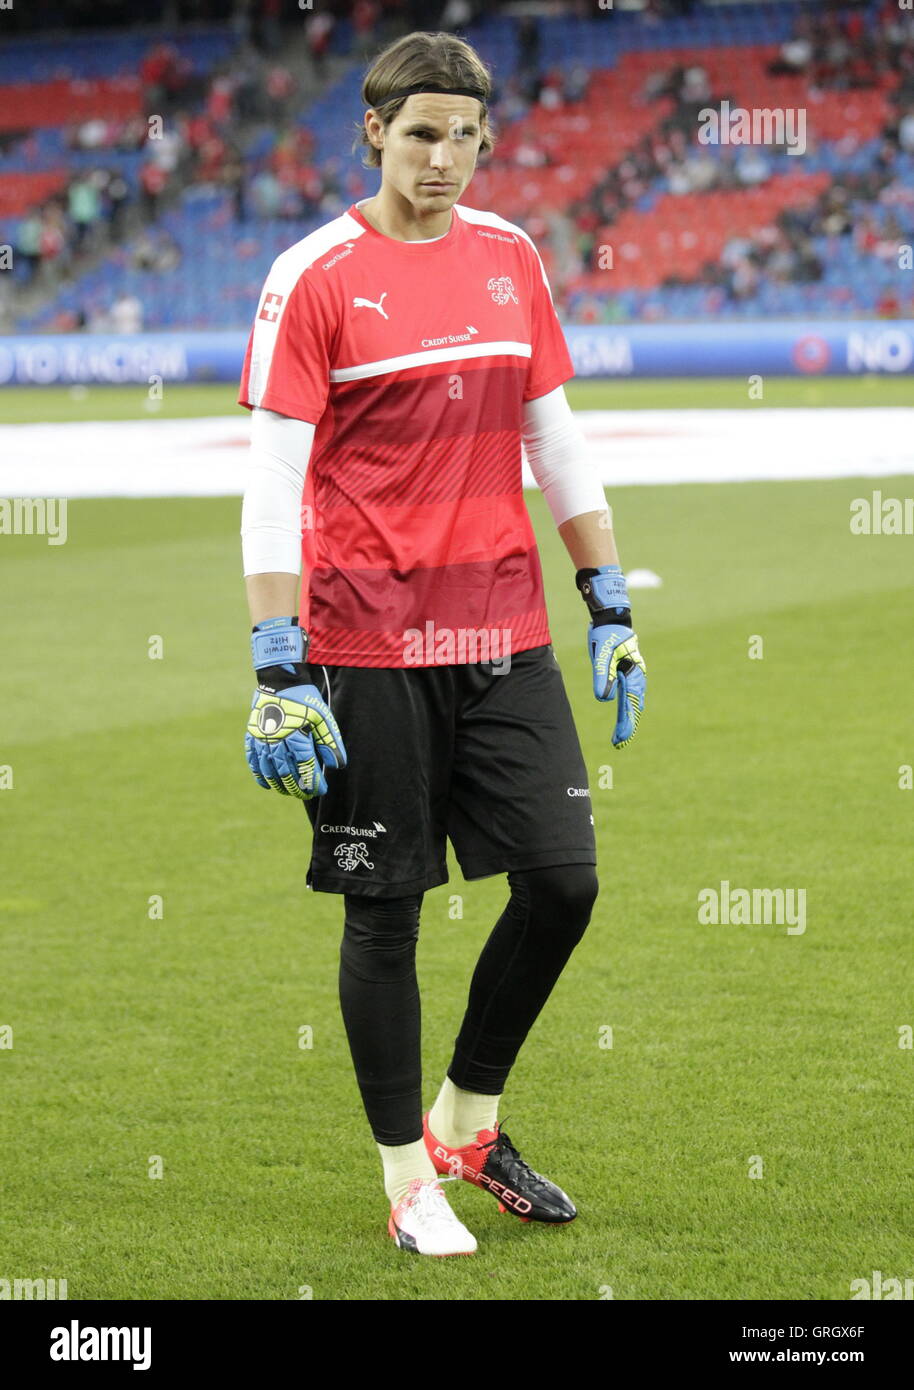 Basel, Switzerland. 6 September 2016 Yann Sommer at the echauffement when the cut qualifying match World Group B Switzerland against Portugal at St Jakob Park in Basel, Switzerland Credit:  Laurent Lairys/Agence Locevaphotos/Alamy Live News Stock Photo